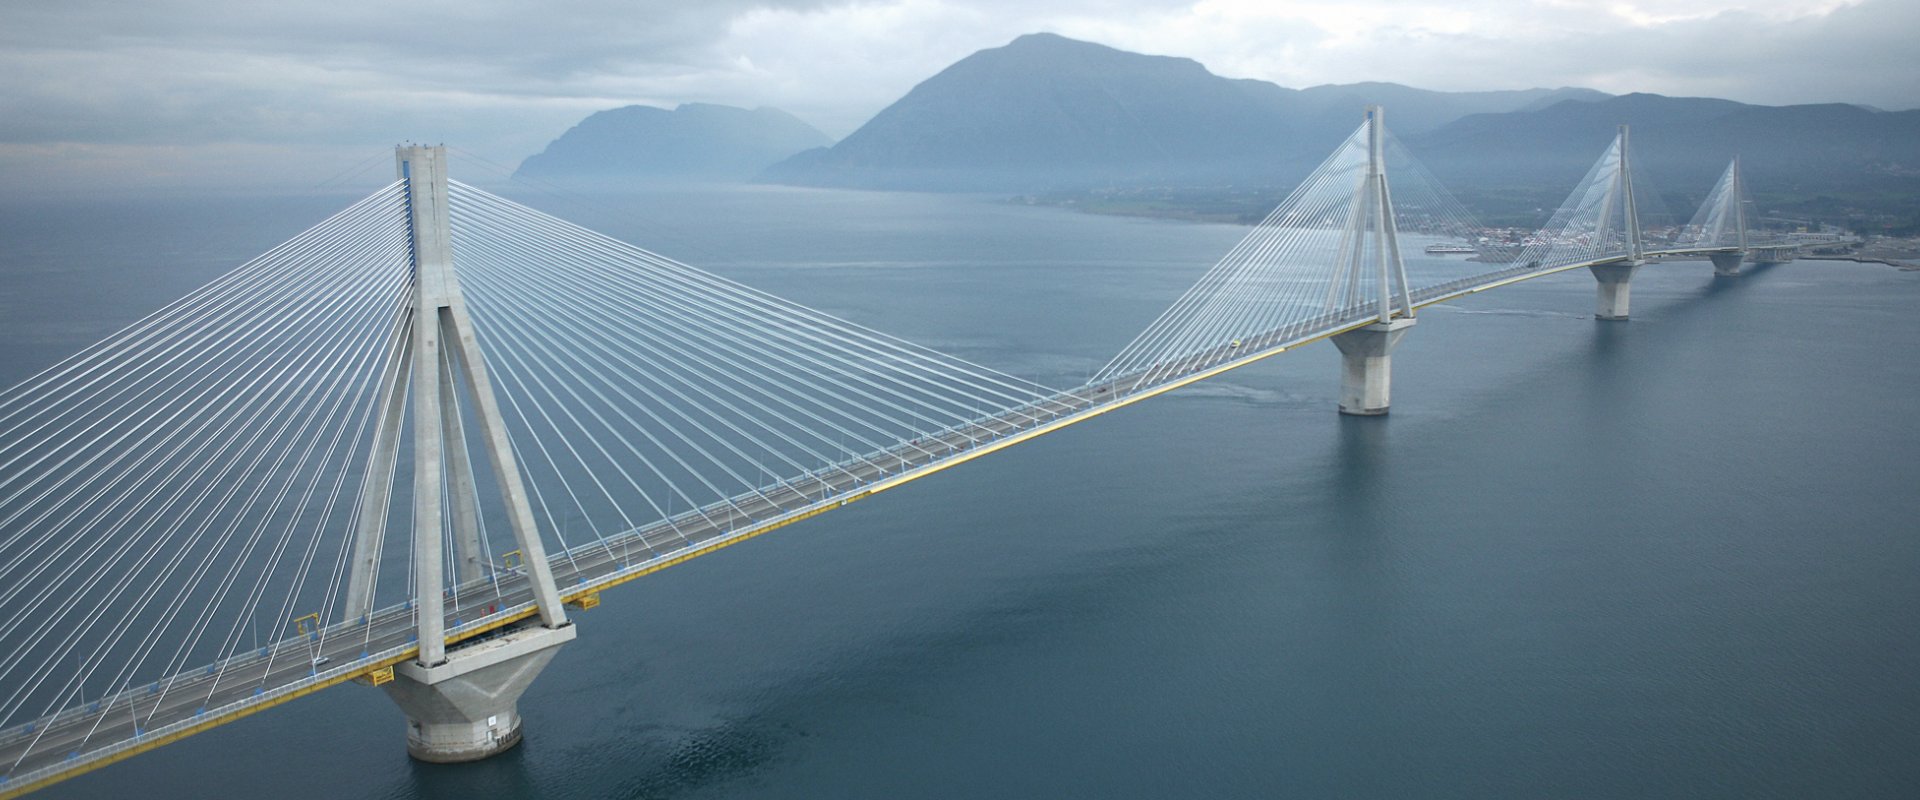 The Rion-Antirion bridge in Greece